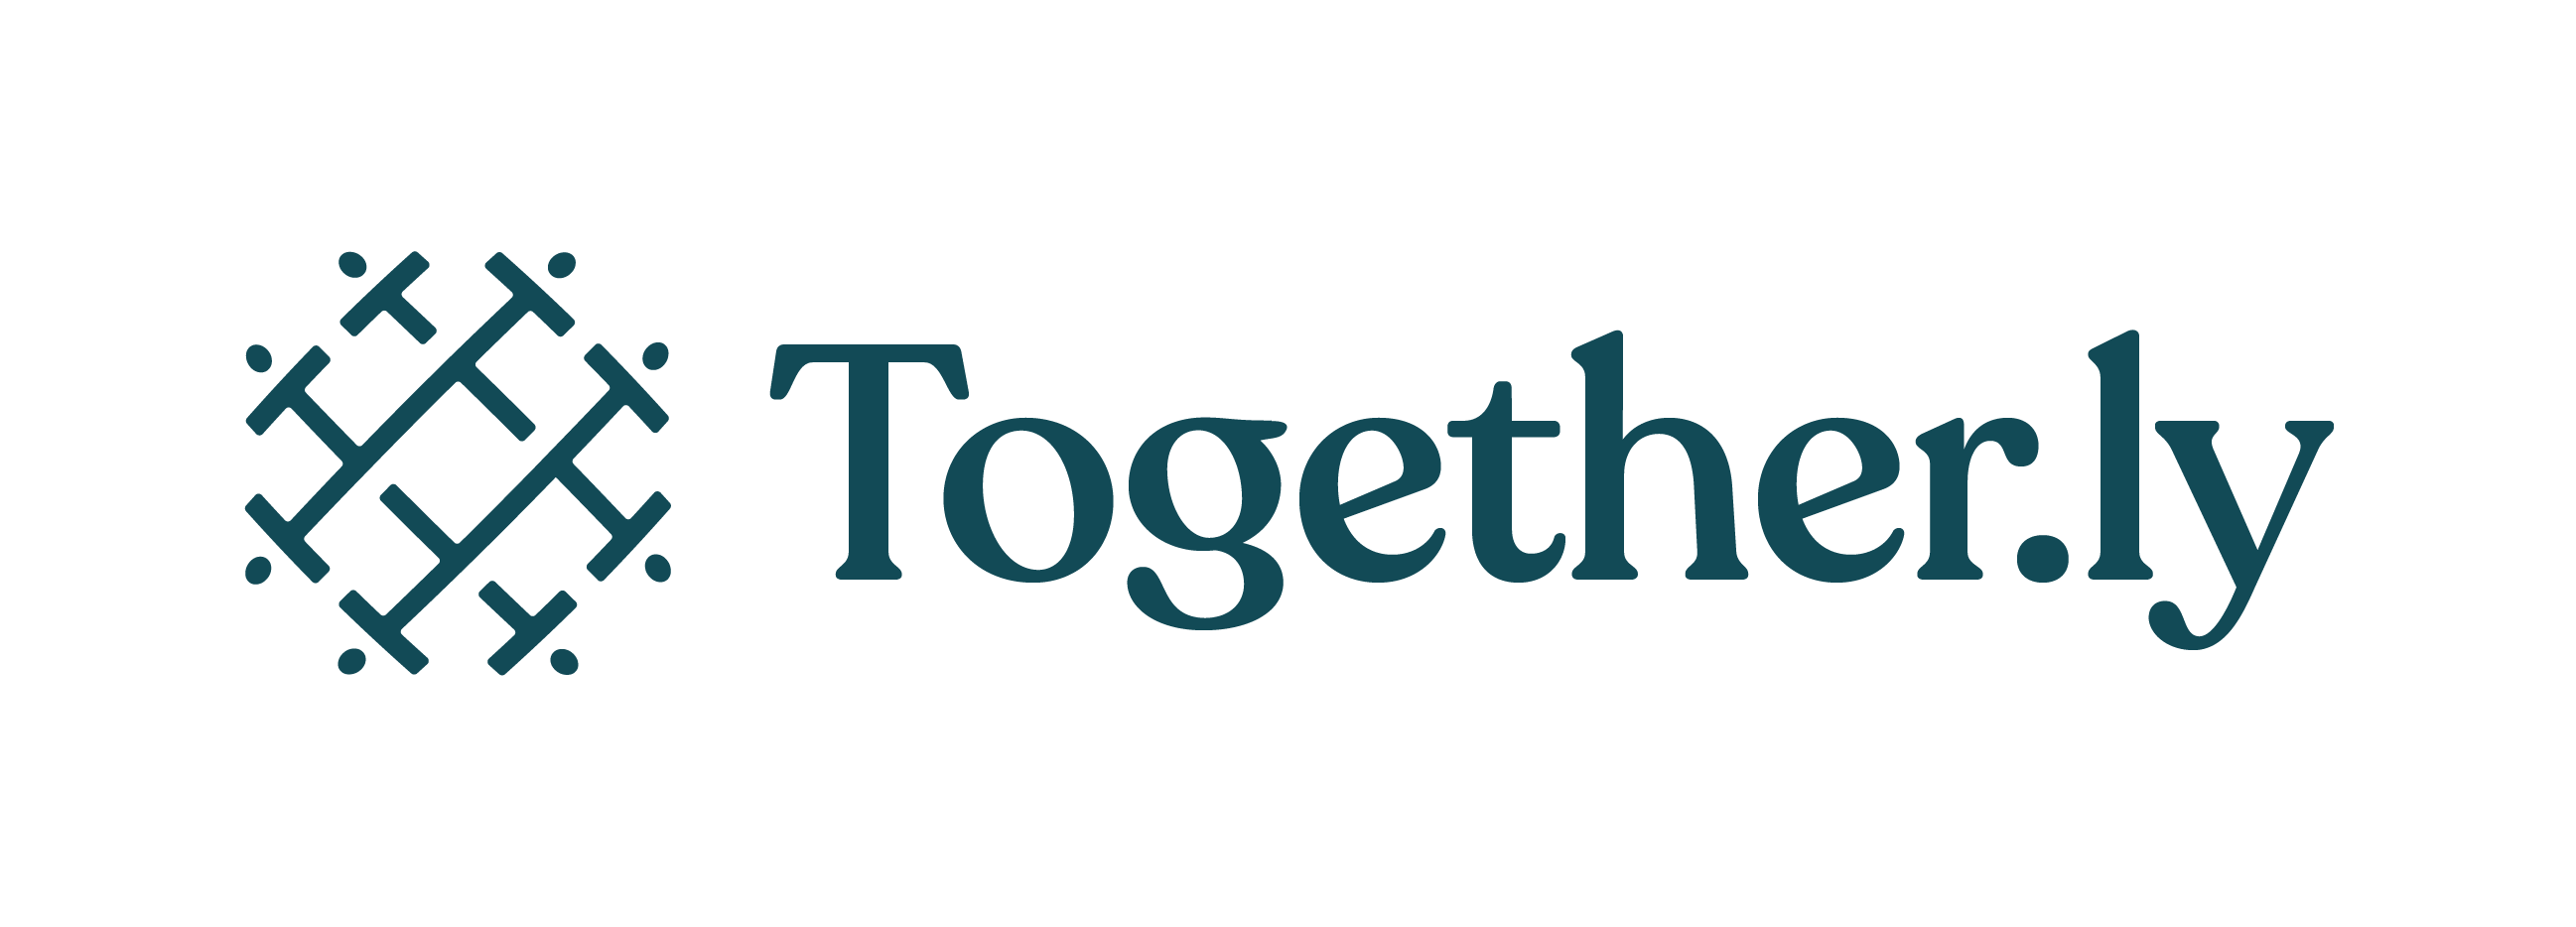 Together.ly logo